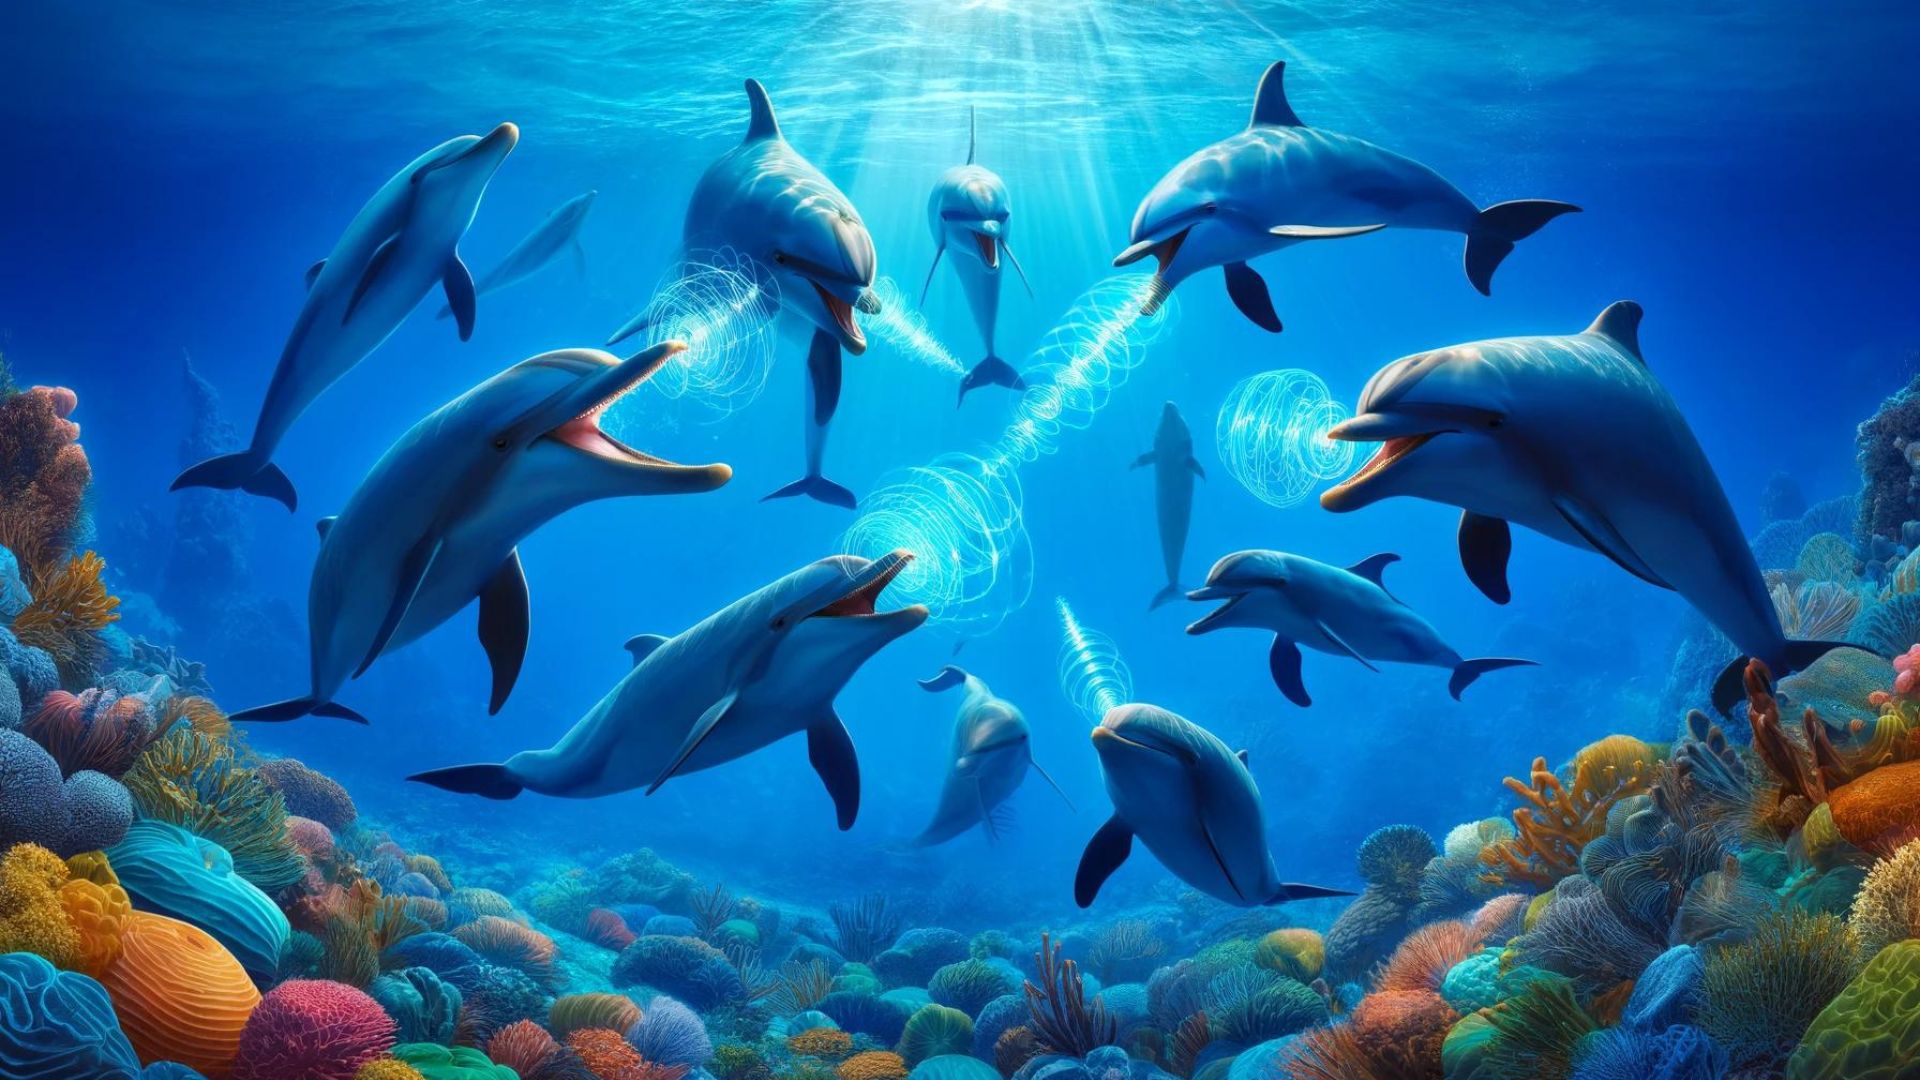 dolphins give themselves names through unique whistle sounds